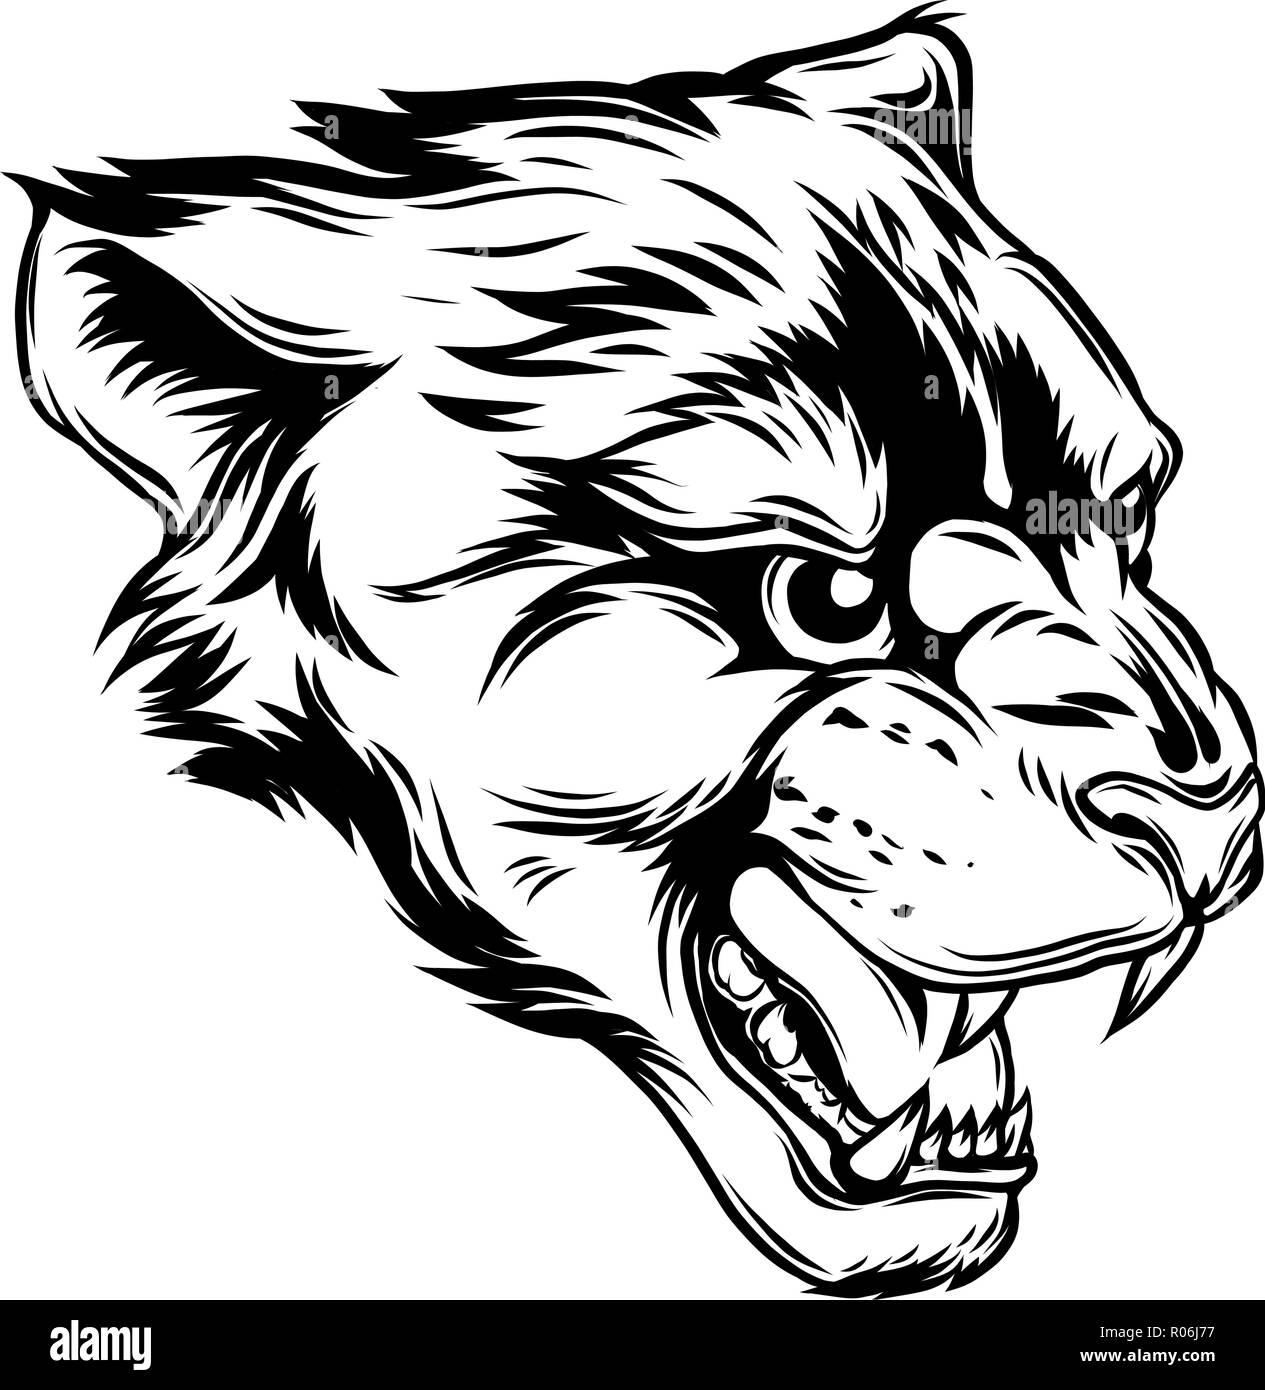 Cougar Panther Mascot Head Vector Graphic illustration Stock Vektor